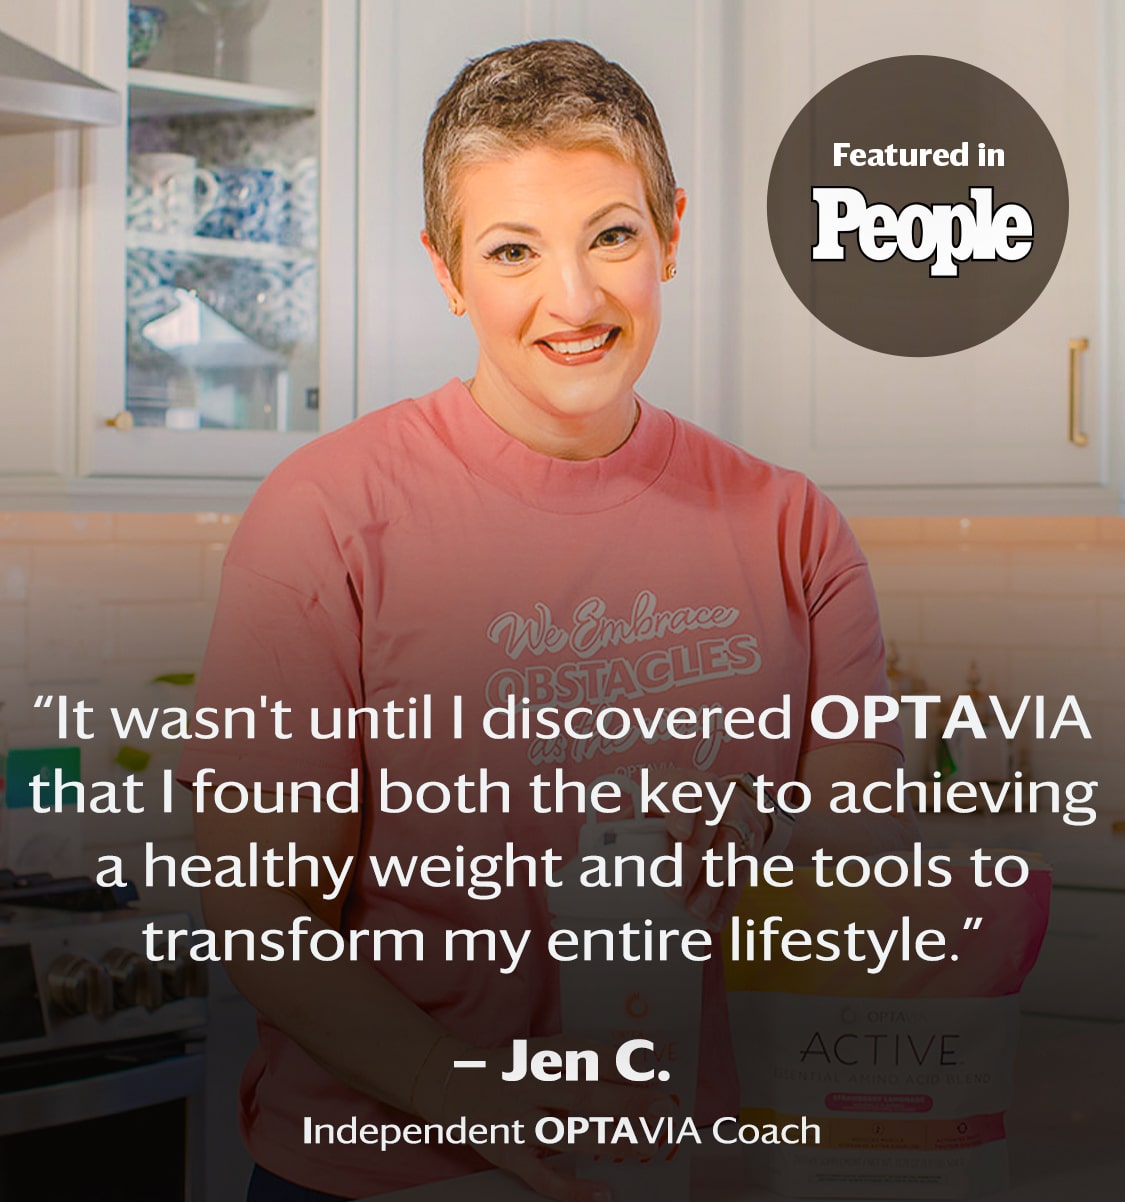 It wasn't until I discovered Optavia that I found both the key to achieving a healthy weight and the tools to transform my entire lifestyle. Jen C., Independent Optavia Coach.